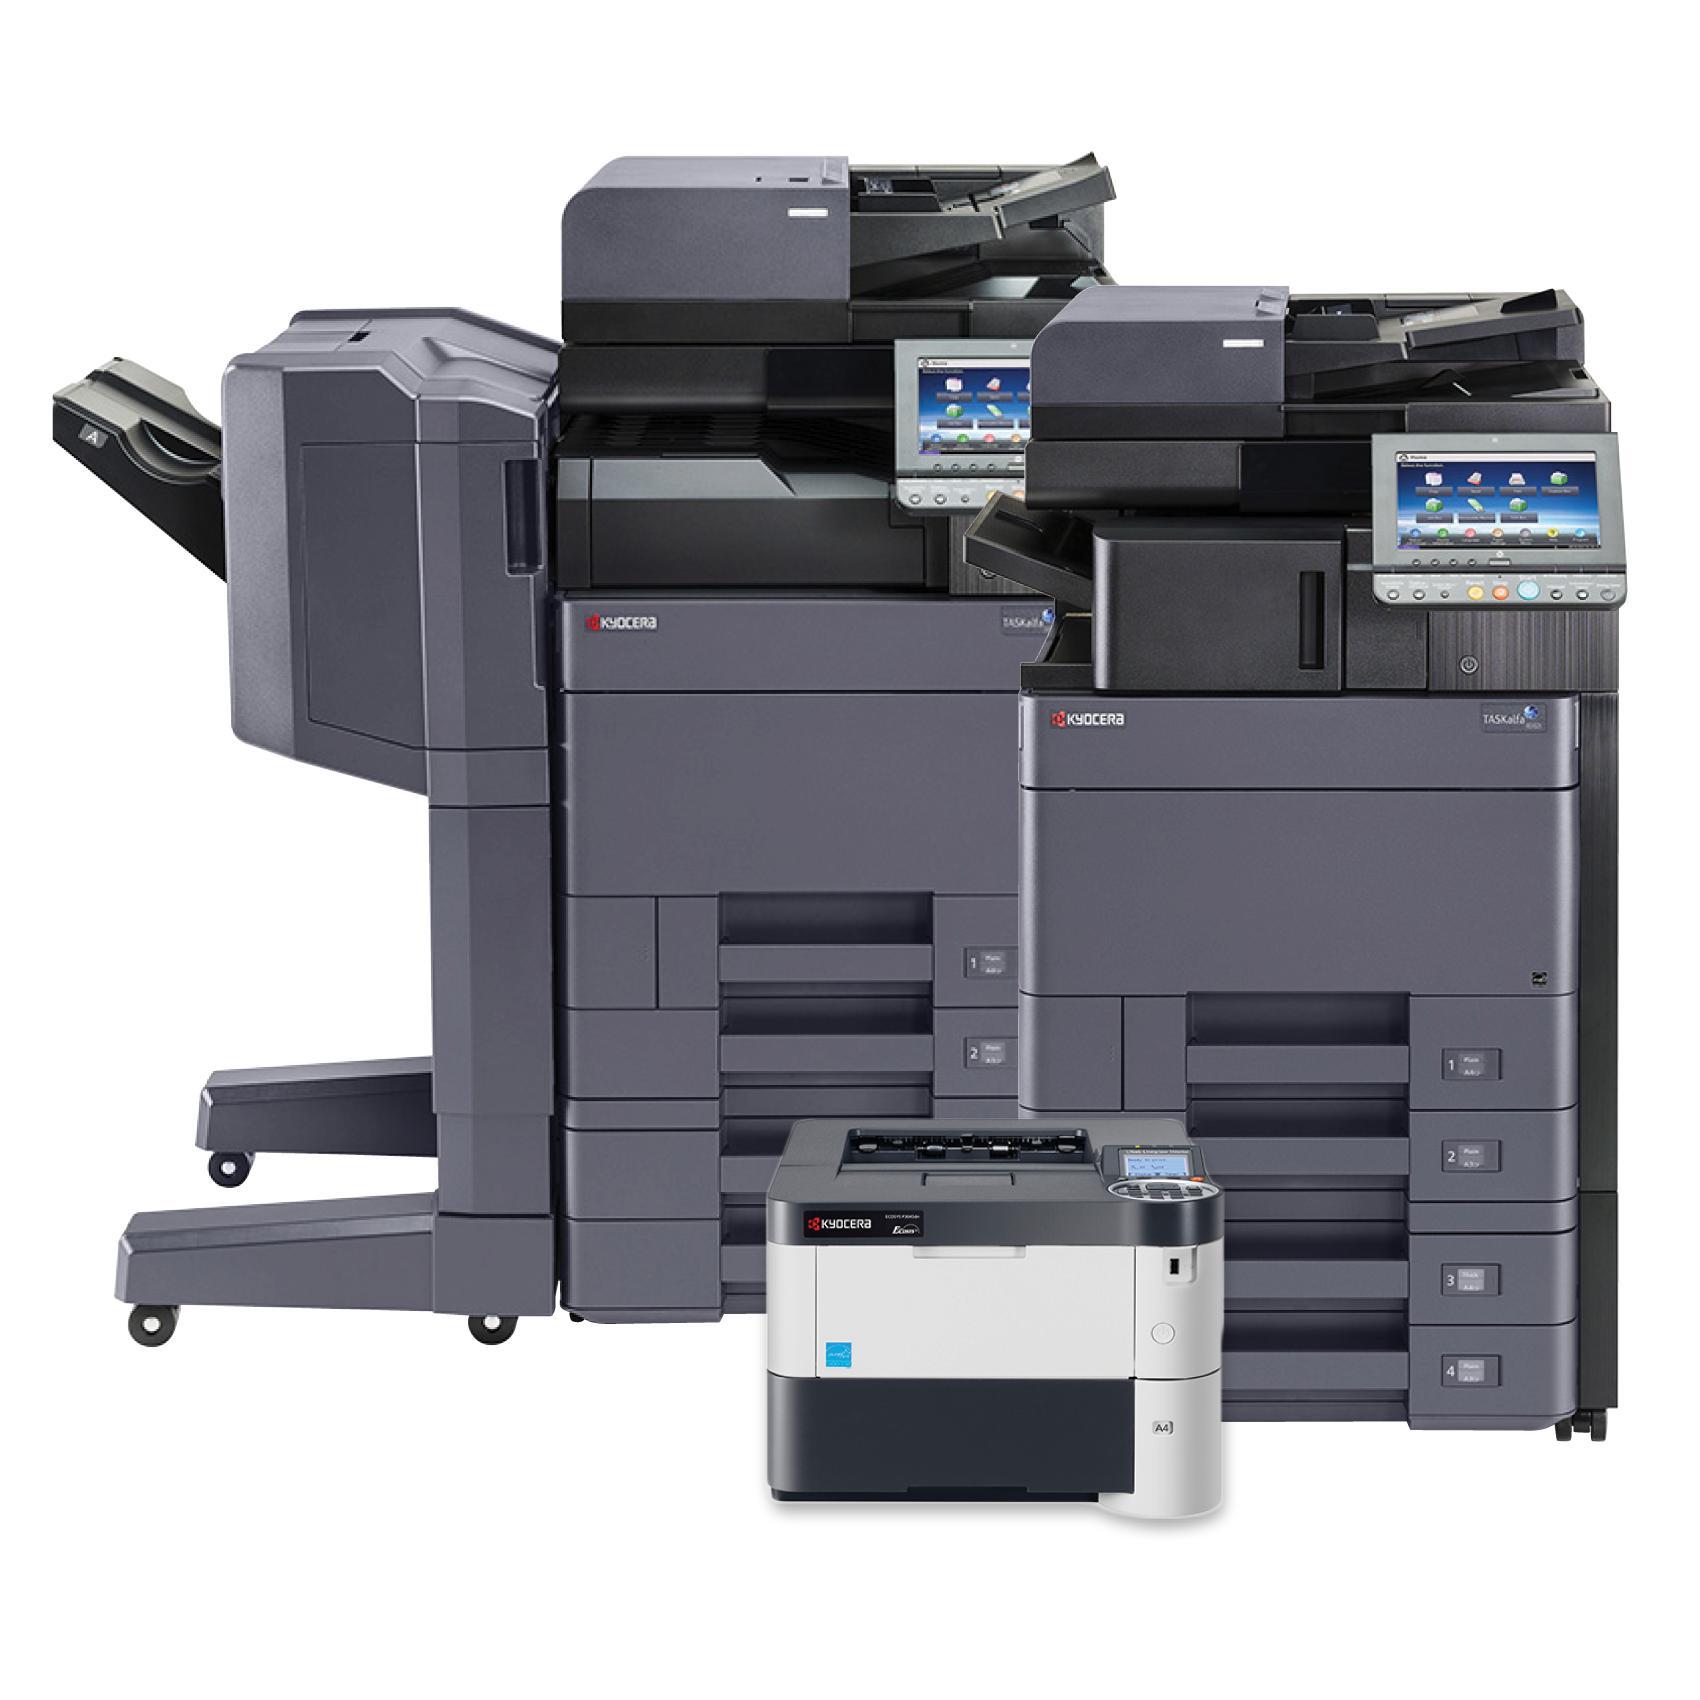 Kyocera Copier Logo - Kyocera Copiers and Printers Office Solutions